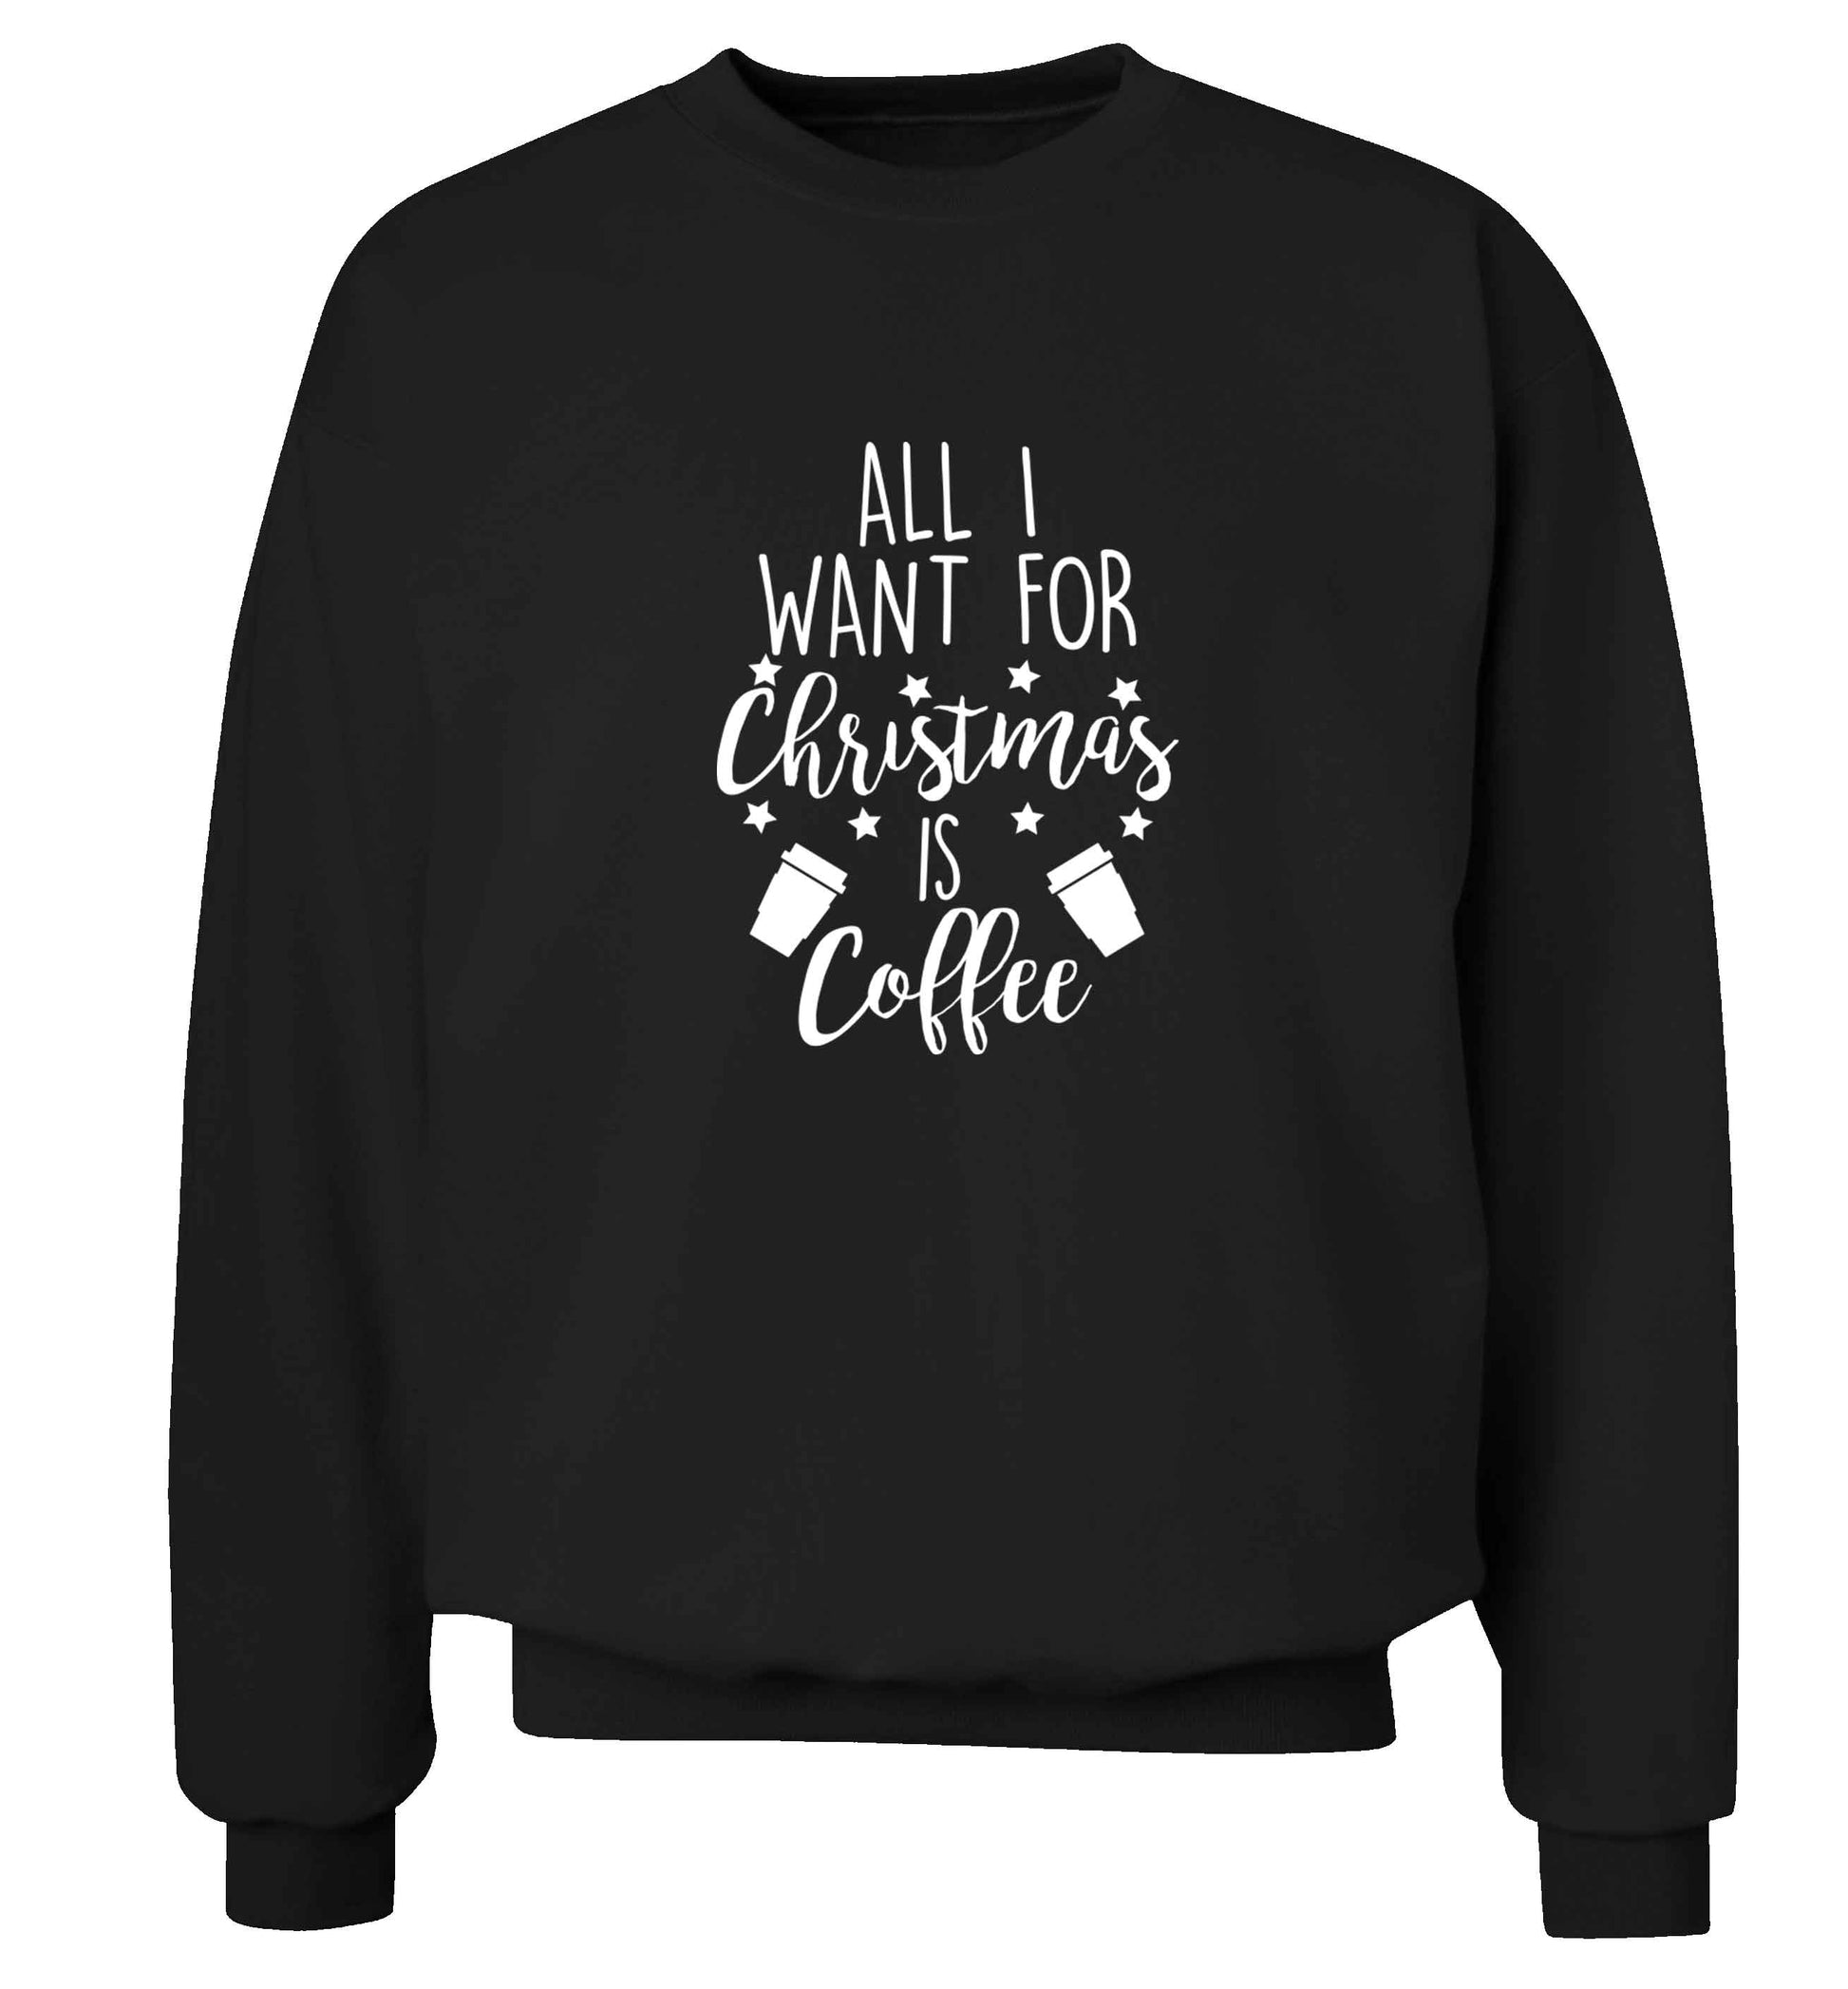 All I want for Christmas is coffee Adult's unisex black Sweater 2XL